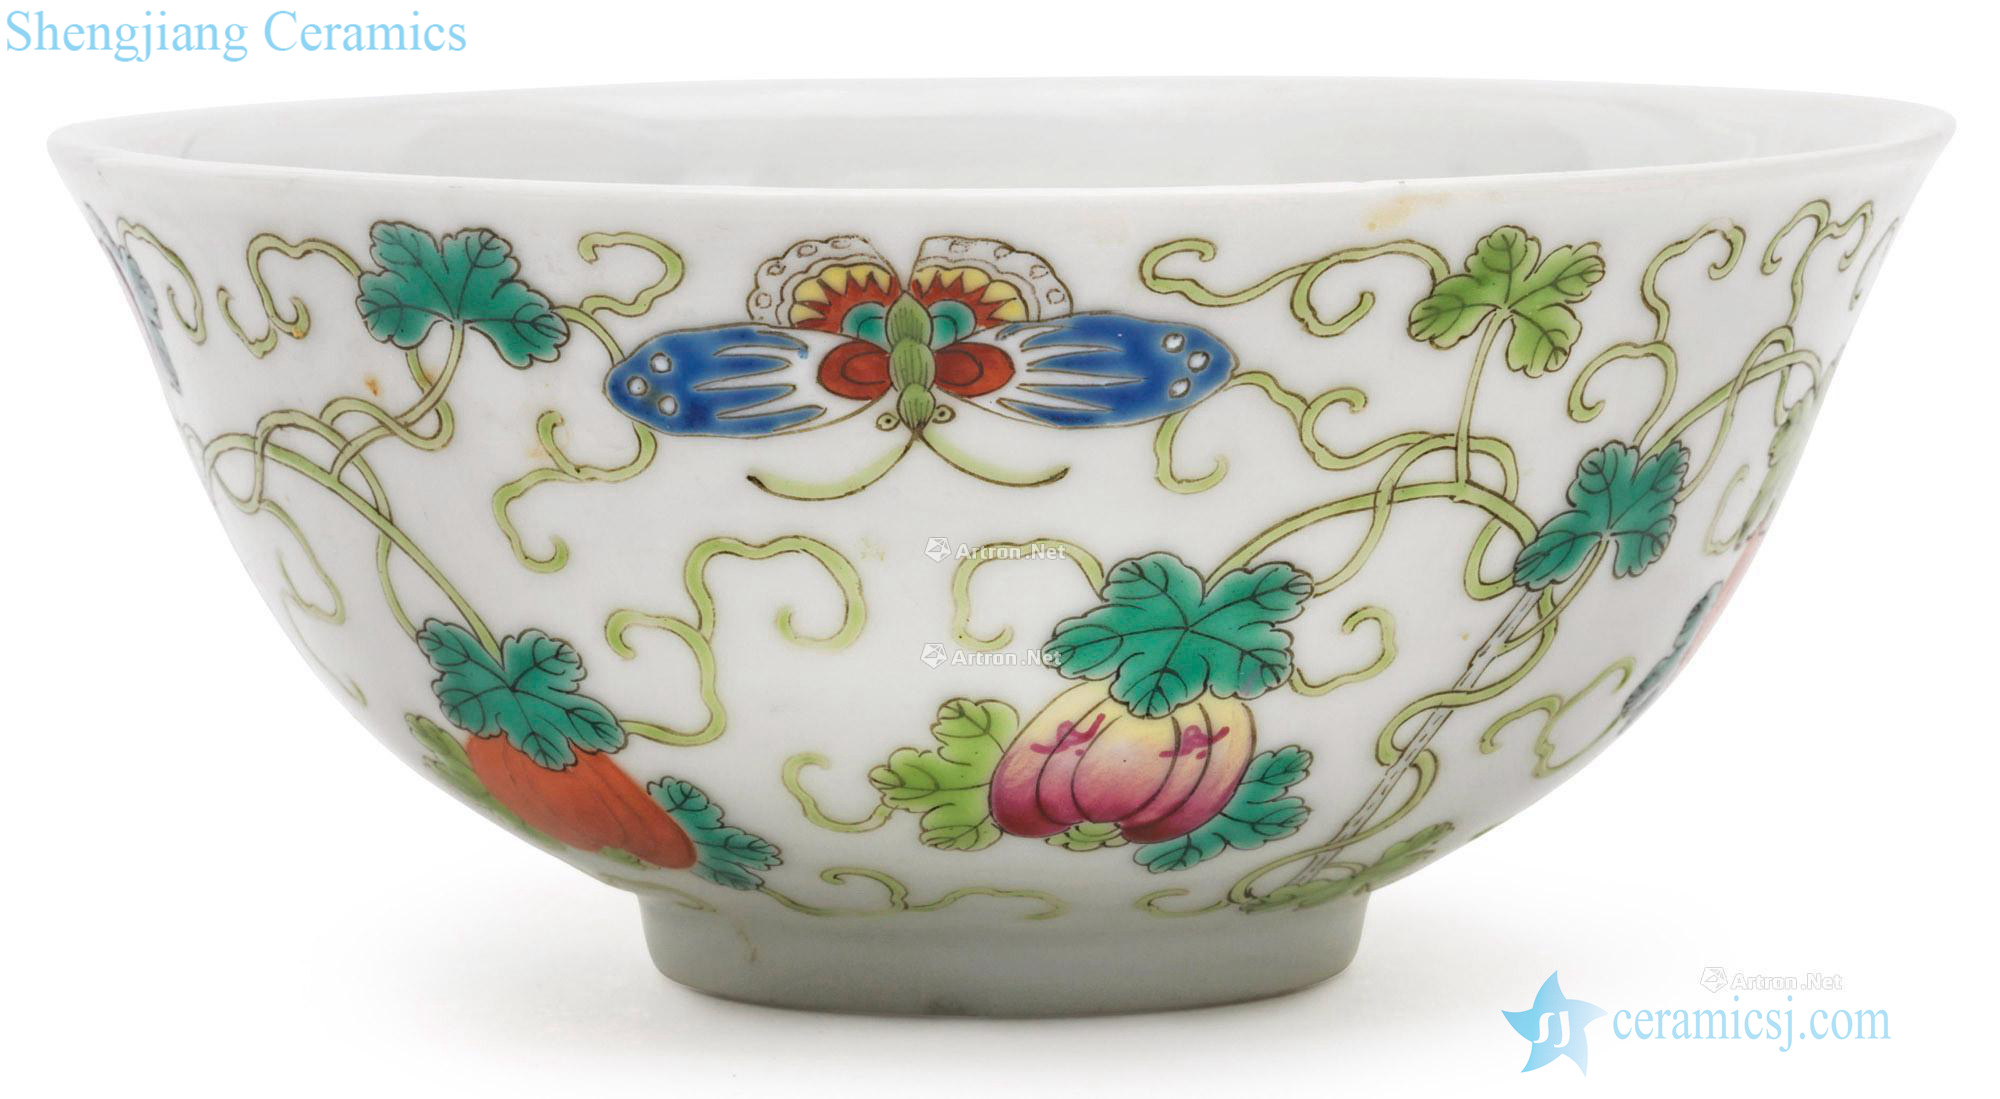 Pastel reign of qing emperor guangxu alum red color is the flourishing of descendants of the bowl